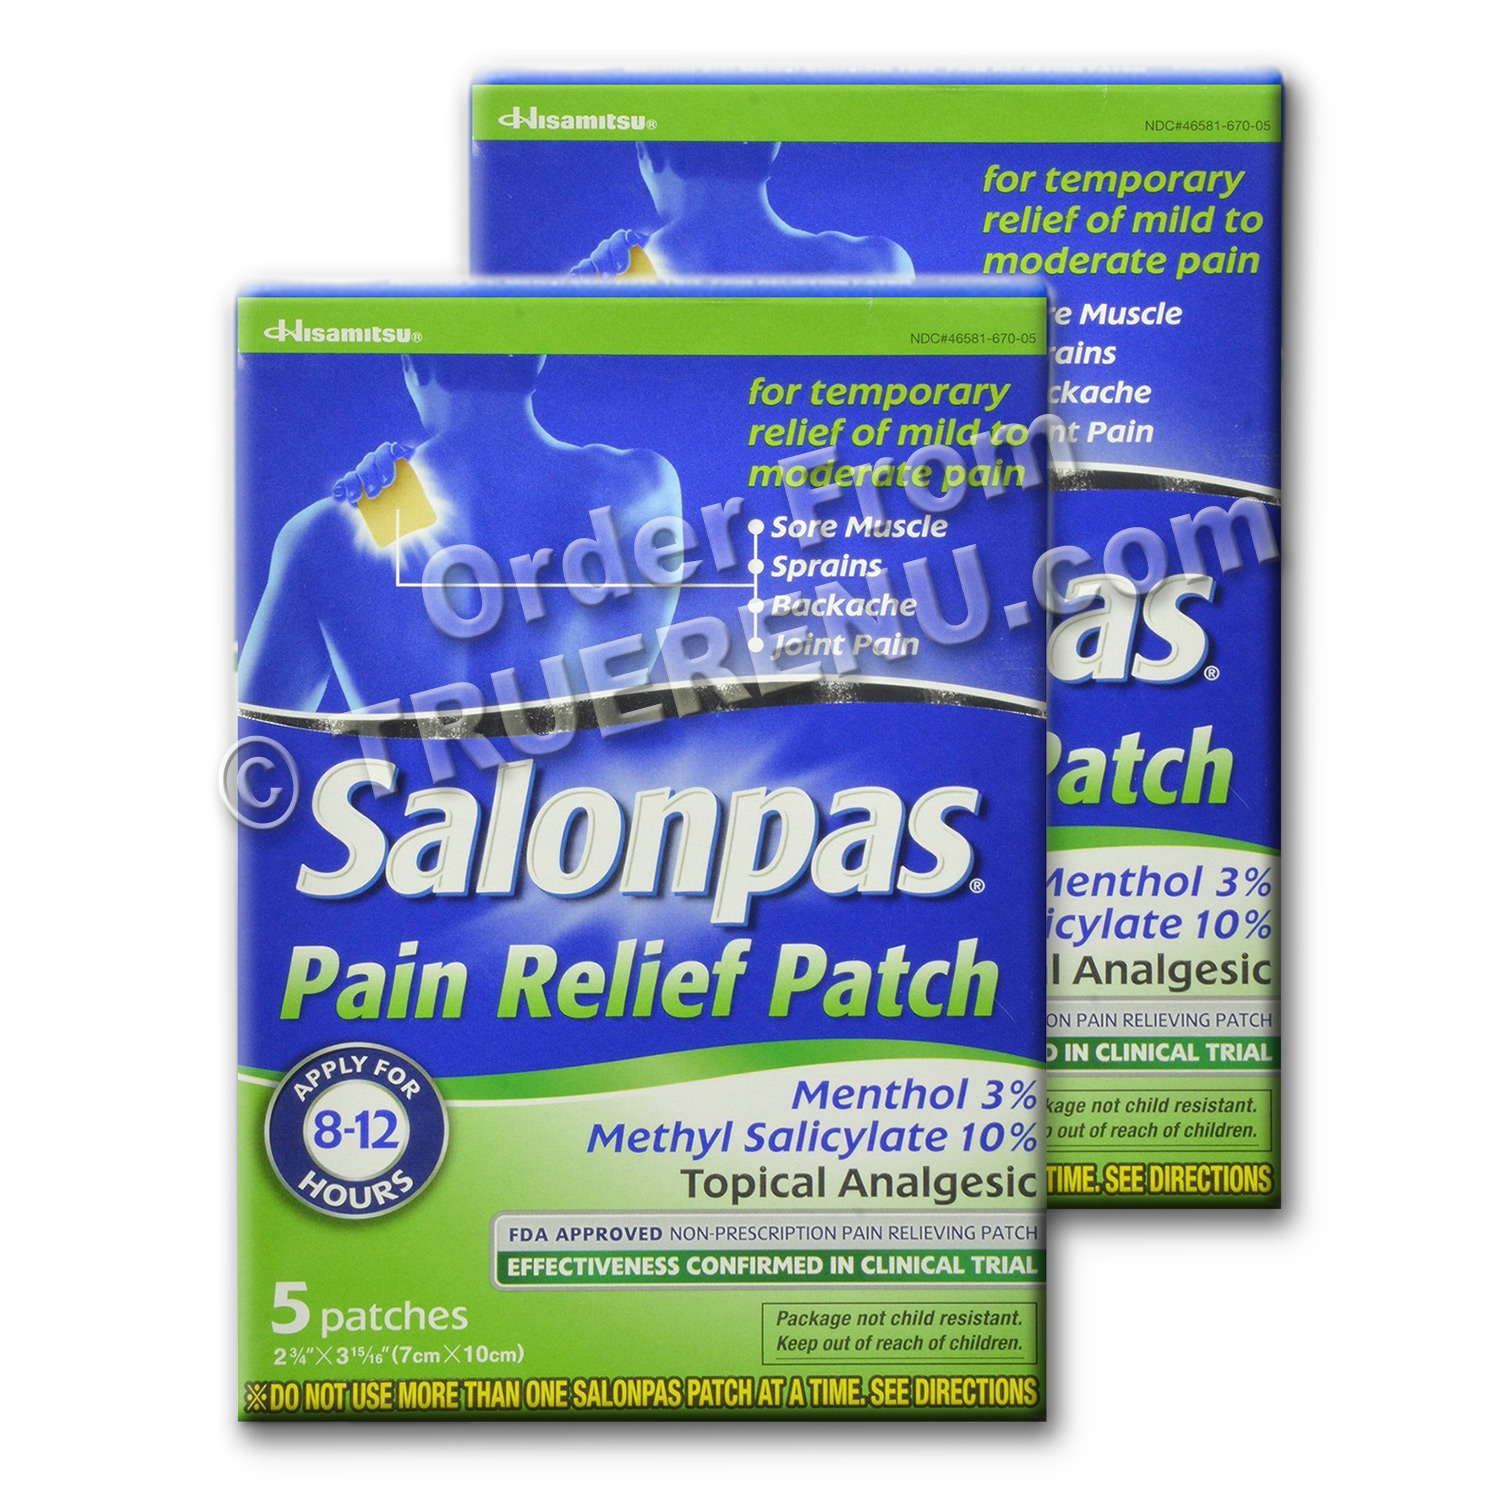 PHOTO TO COME: SALONPAS Ultrathin Pain Relief Patches - - 2 PAK of 5 = 10 total - SAVE $$$ !